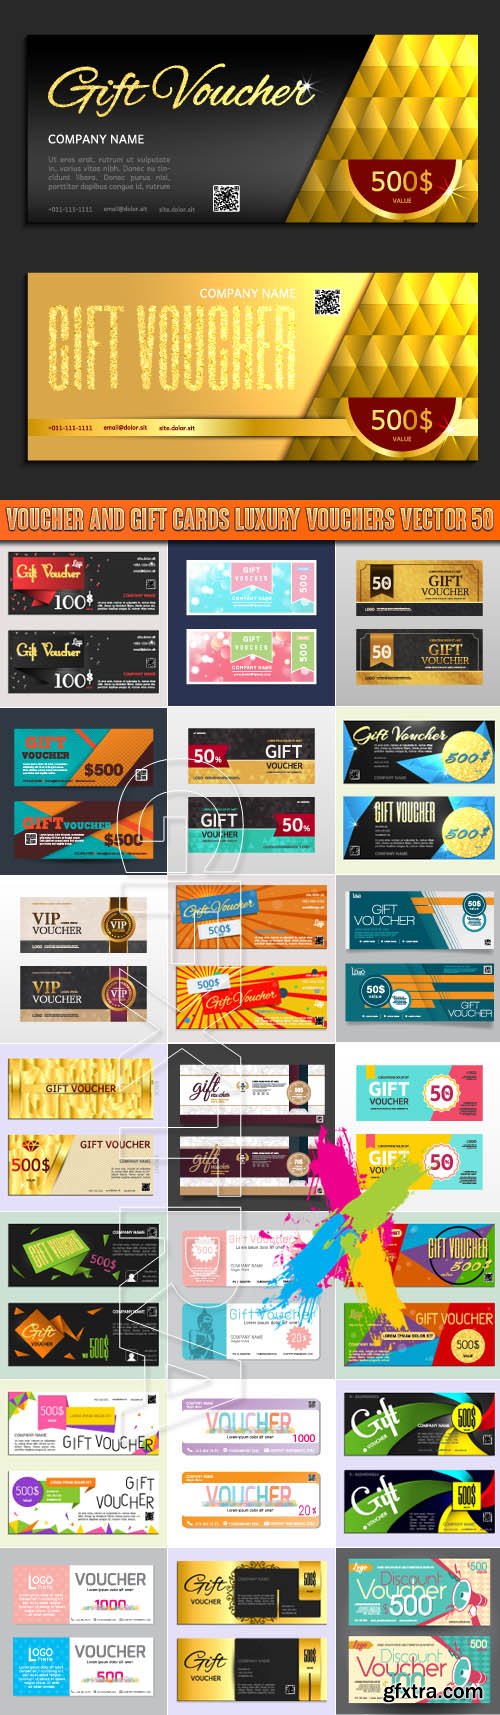 Voucher and gift cards luxury vouchers vector 50